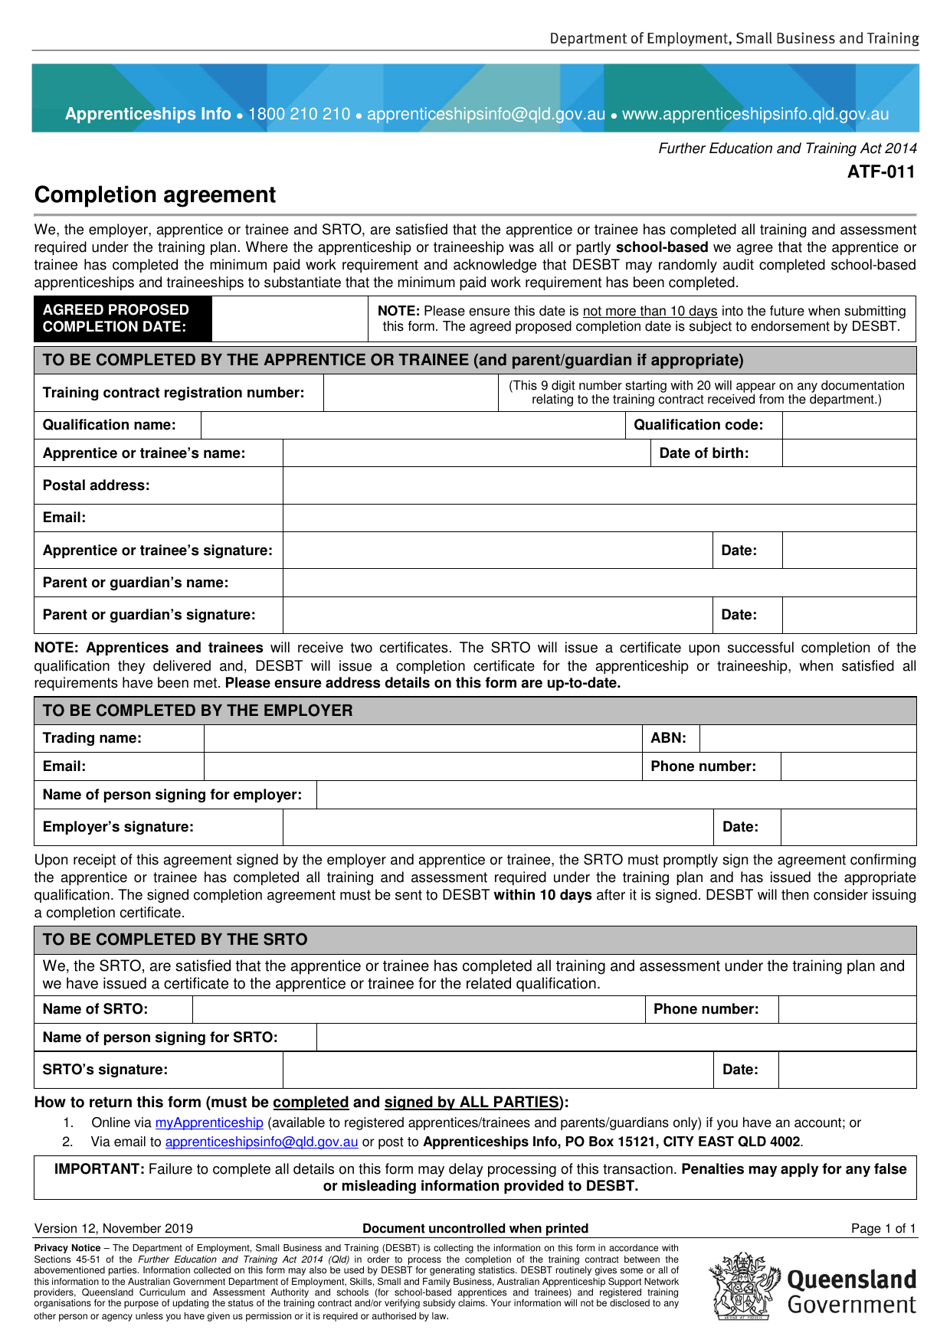 Form ATF-011 Completion Agreement - Queensland, Australia, Page 1